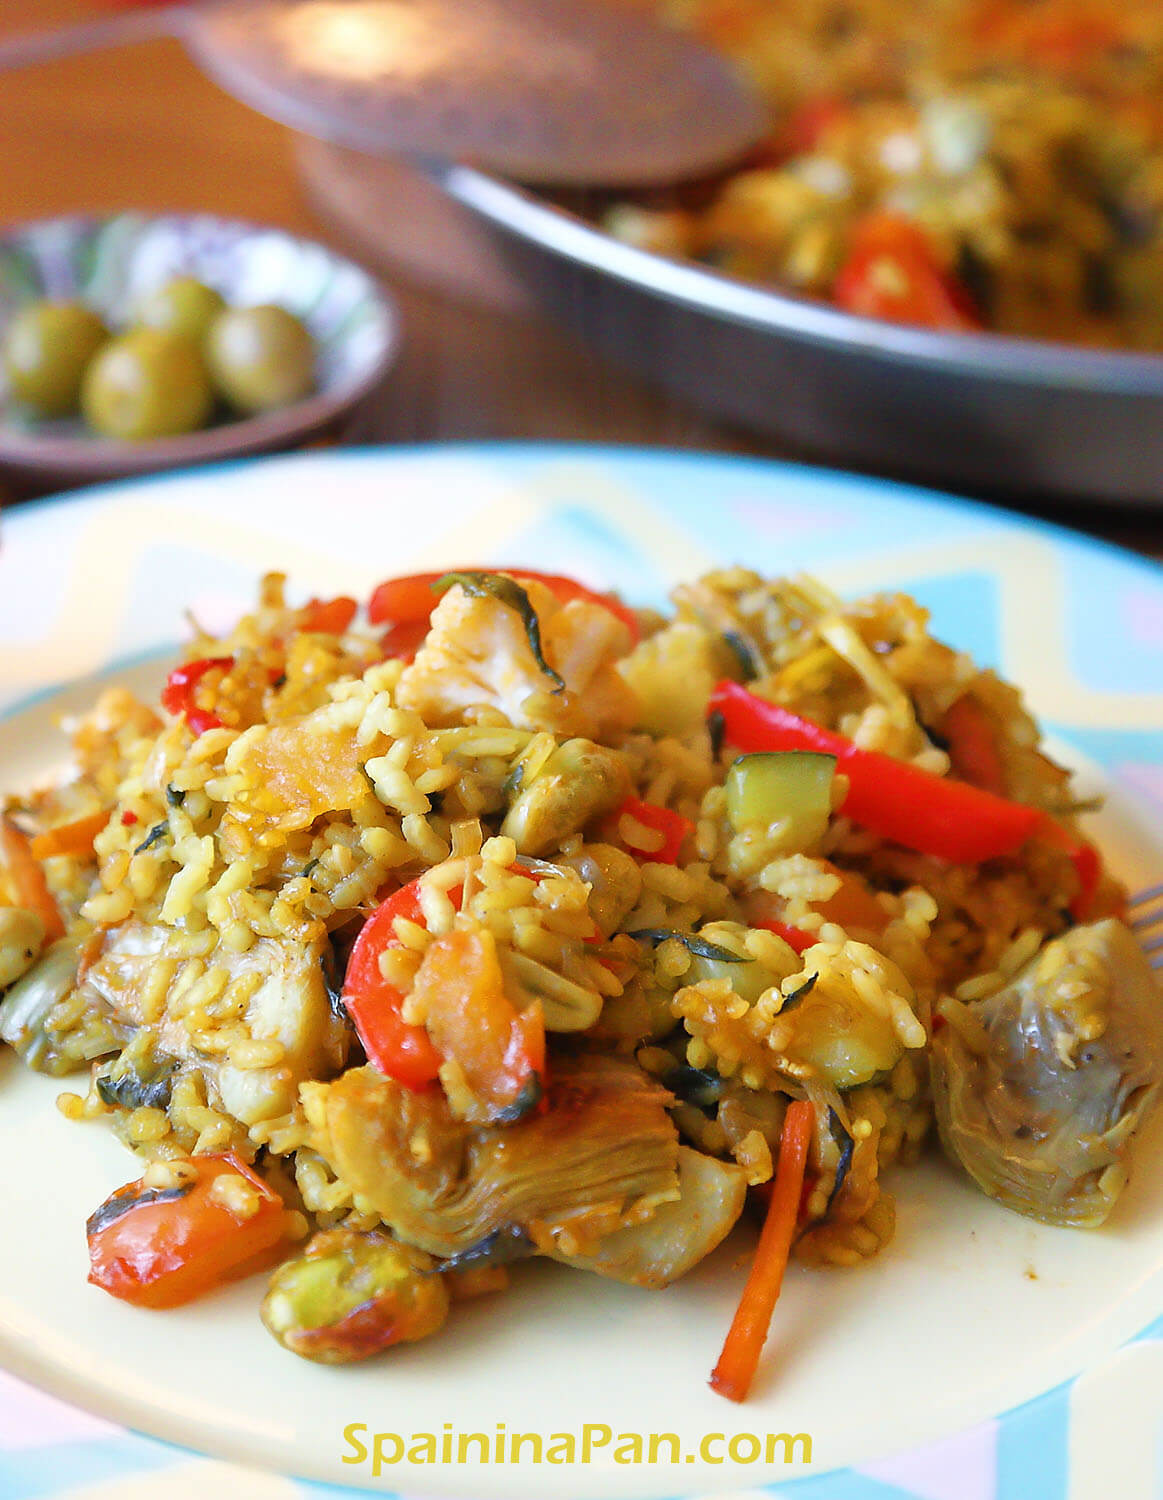 An appetizing plate with vegetable paella